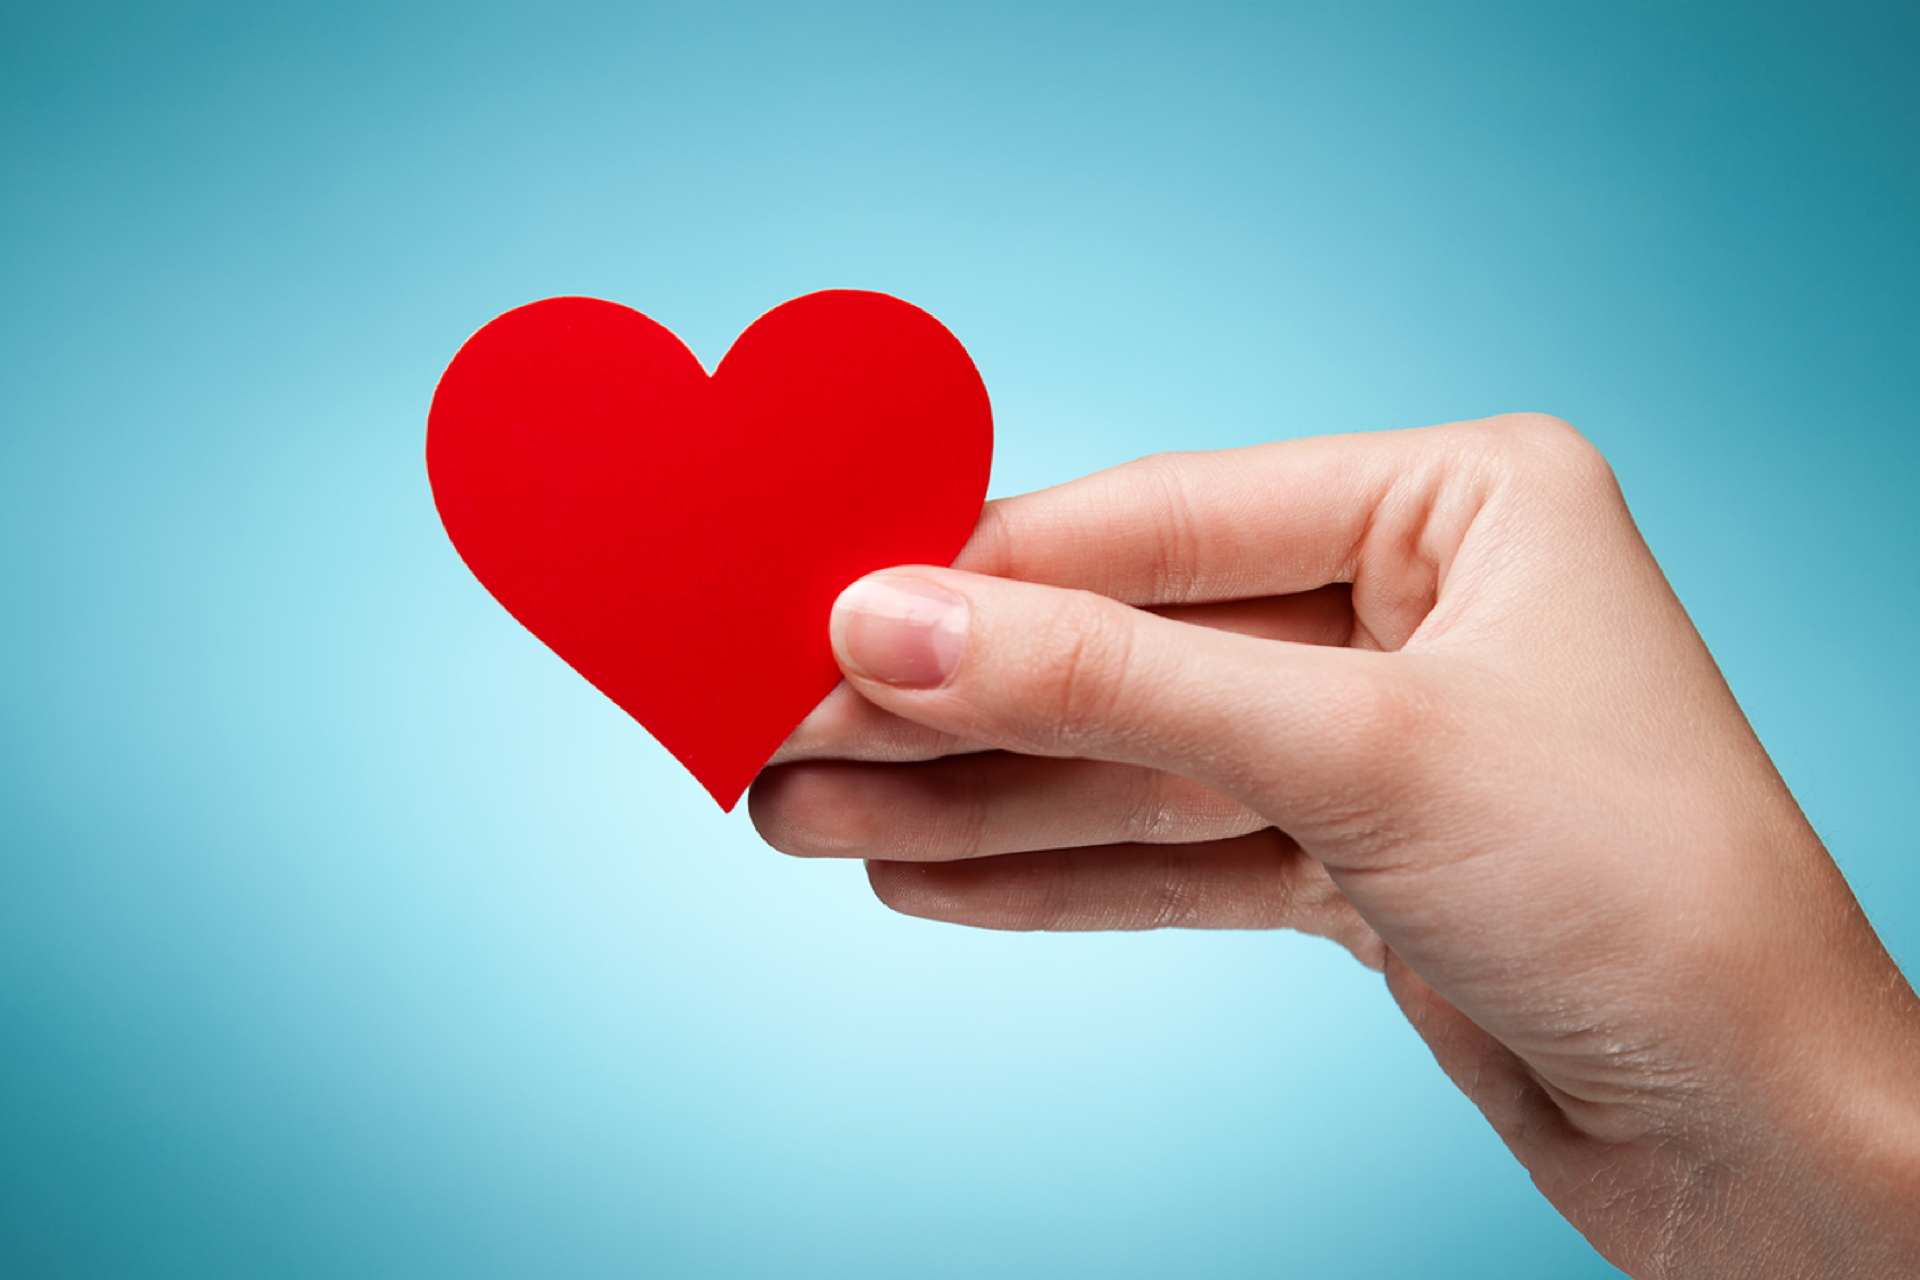 Hand Holding Heart: Kindness in Action